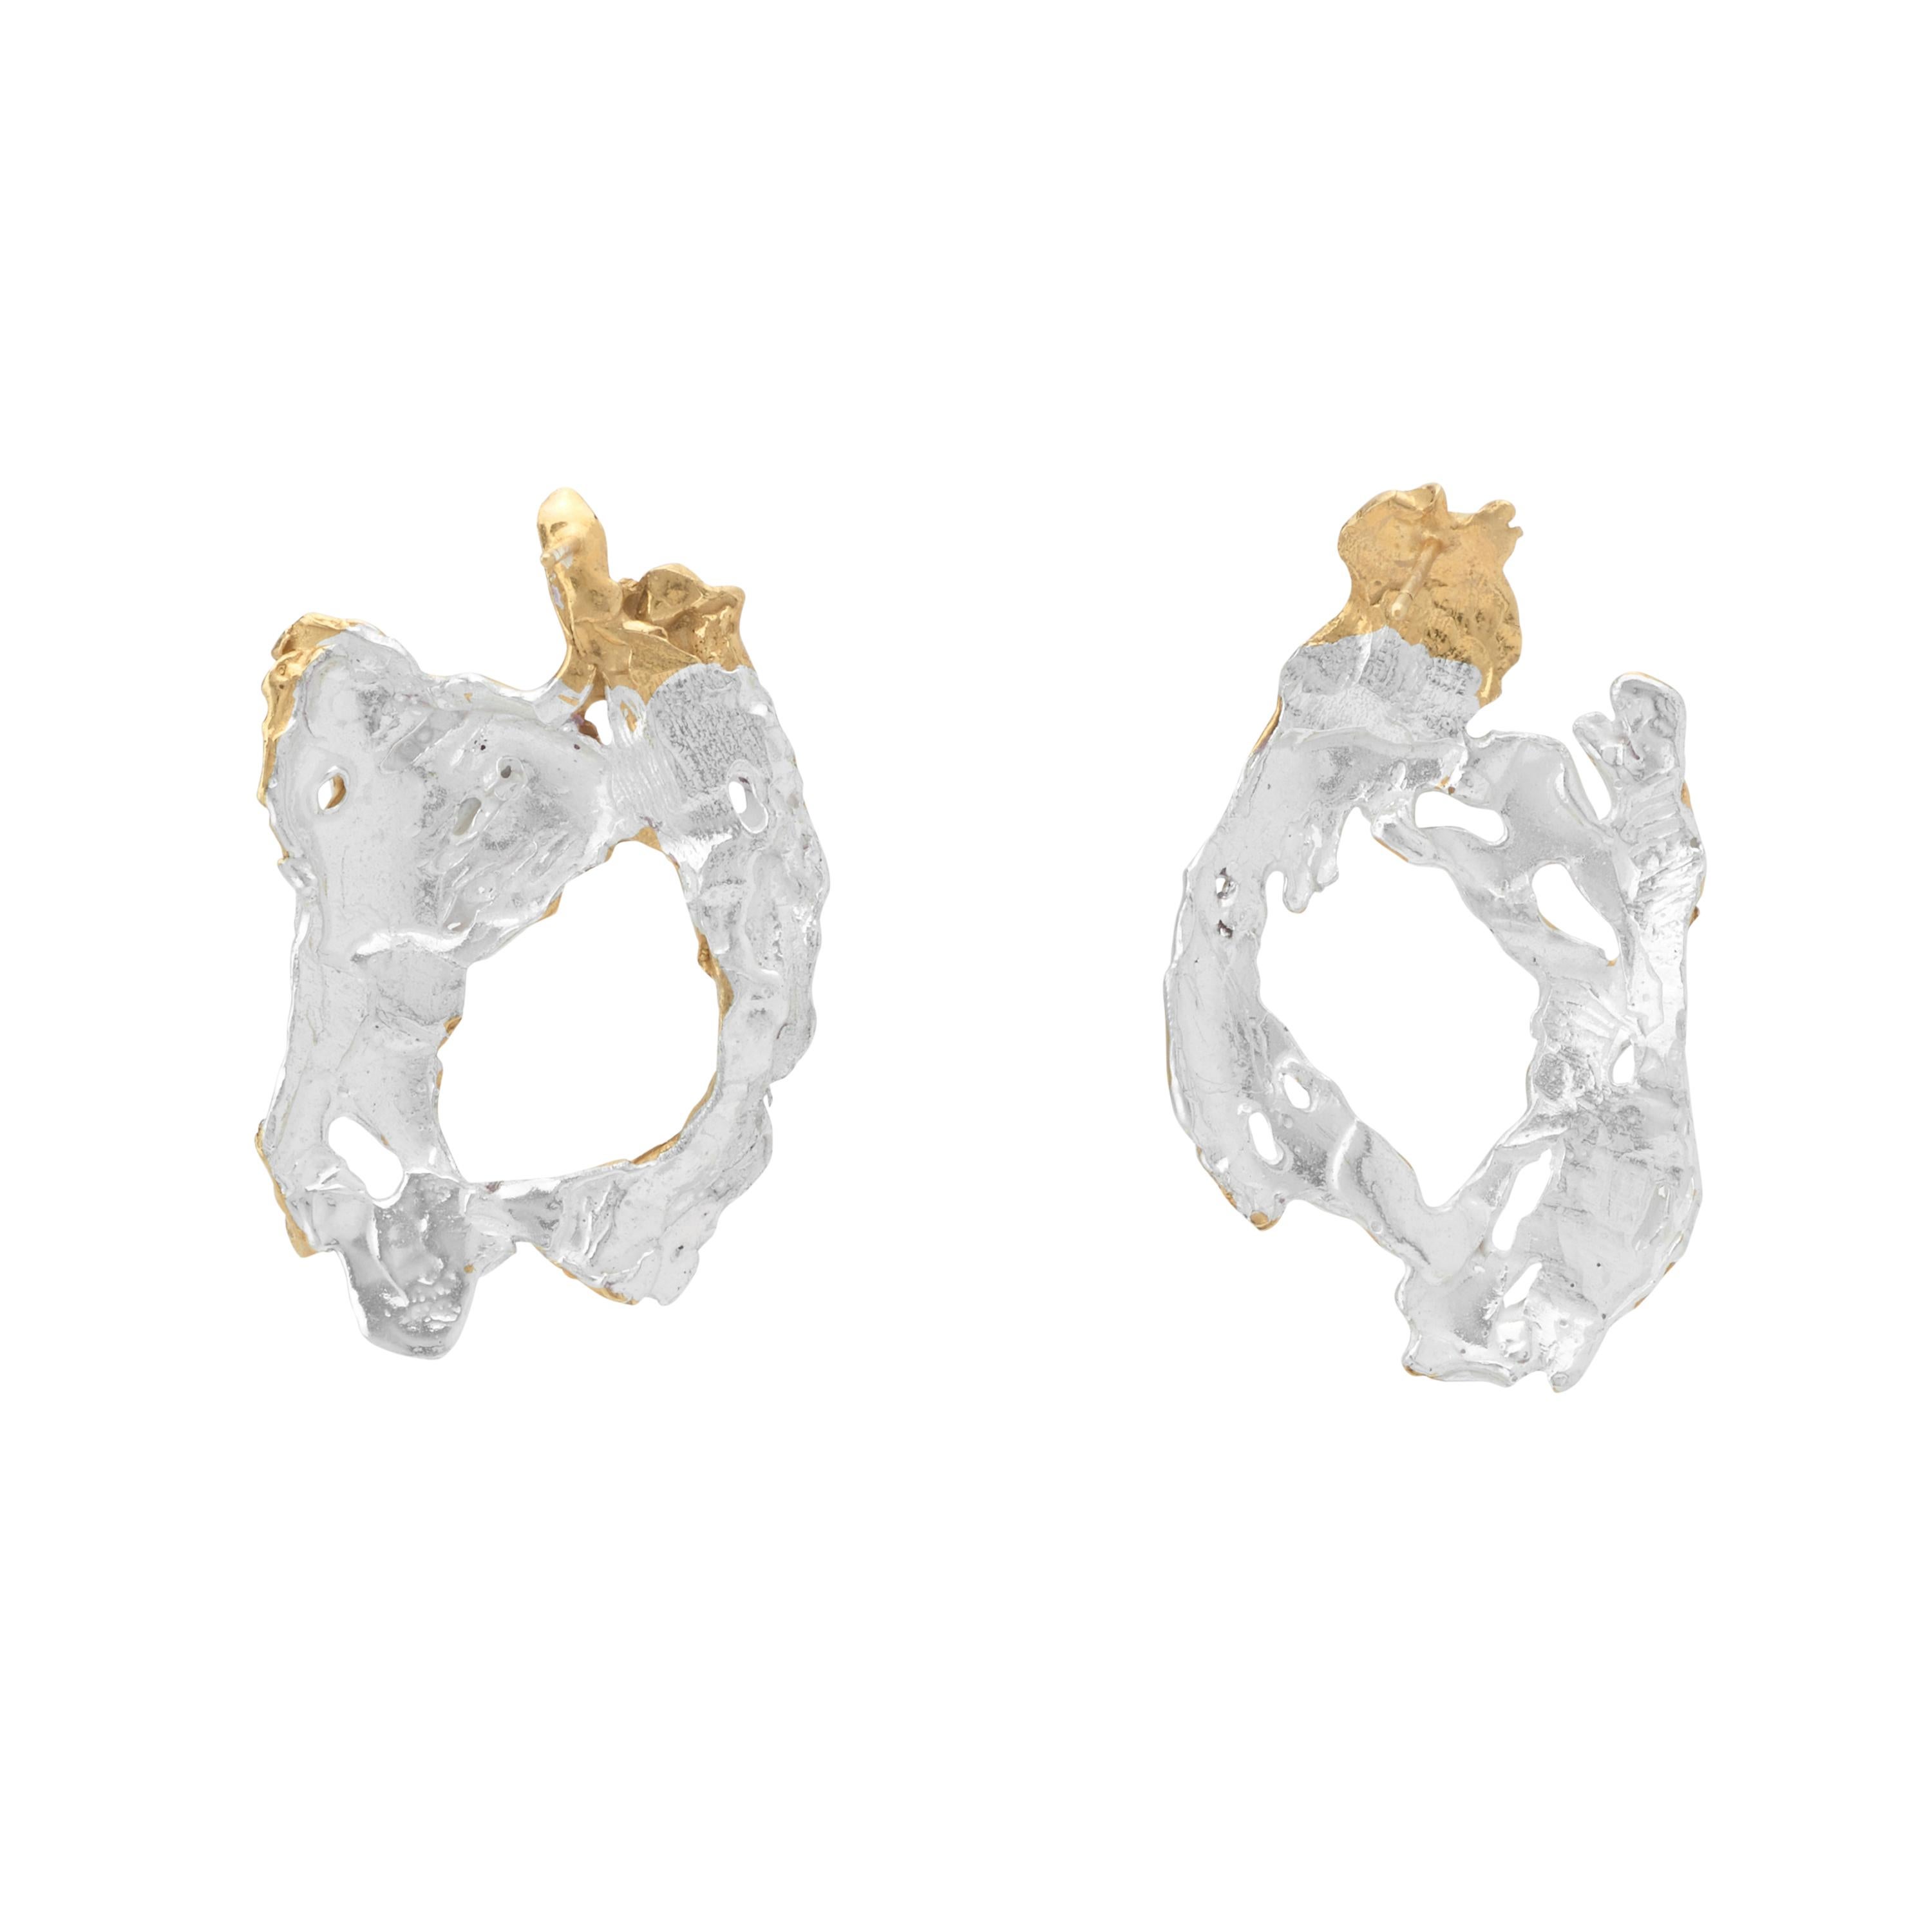 Itsaso is a word in the Basque language, of the western Pyrenees, meaning ‘sea’. The design of this pair of earrings is, like the waters that cover two-thirds of the Earth’s surface, staggering in its spontaneity: their gold and silver colours seem